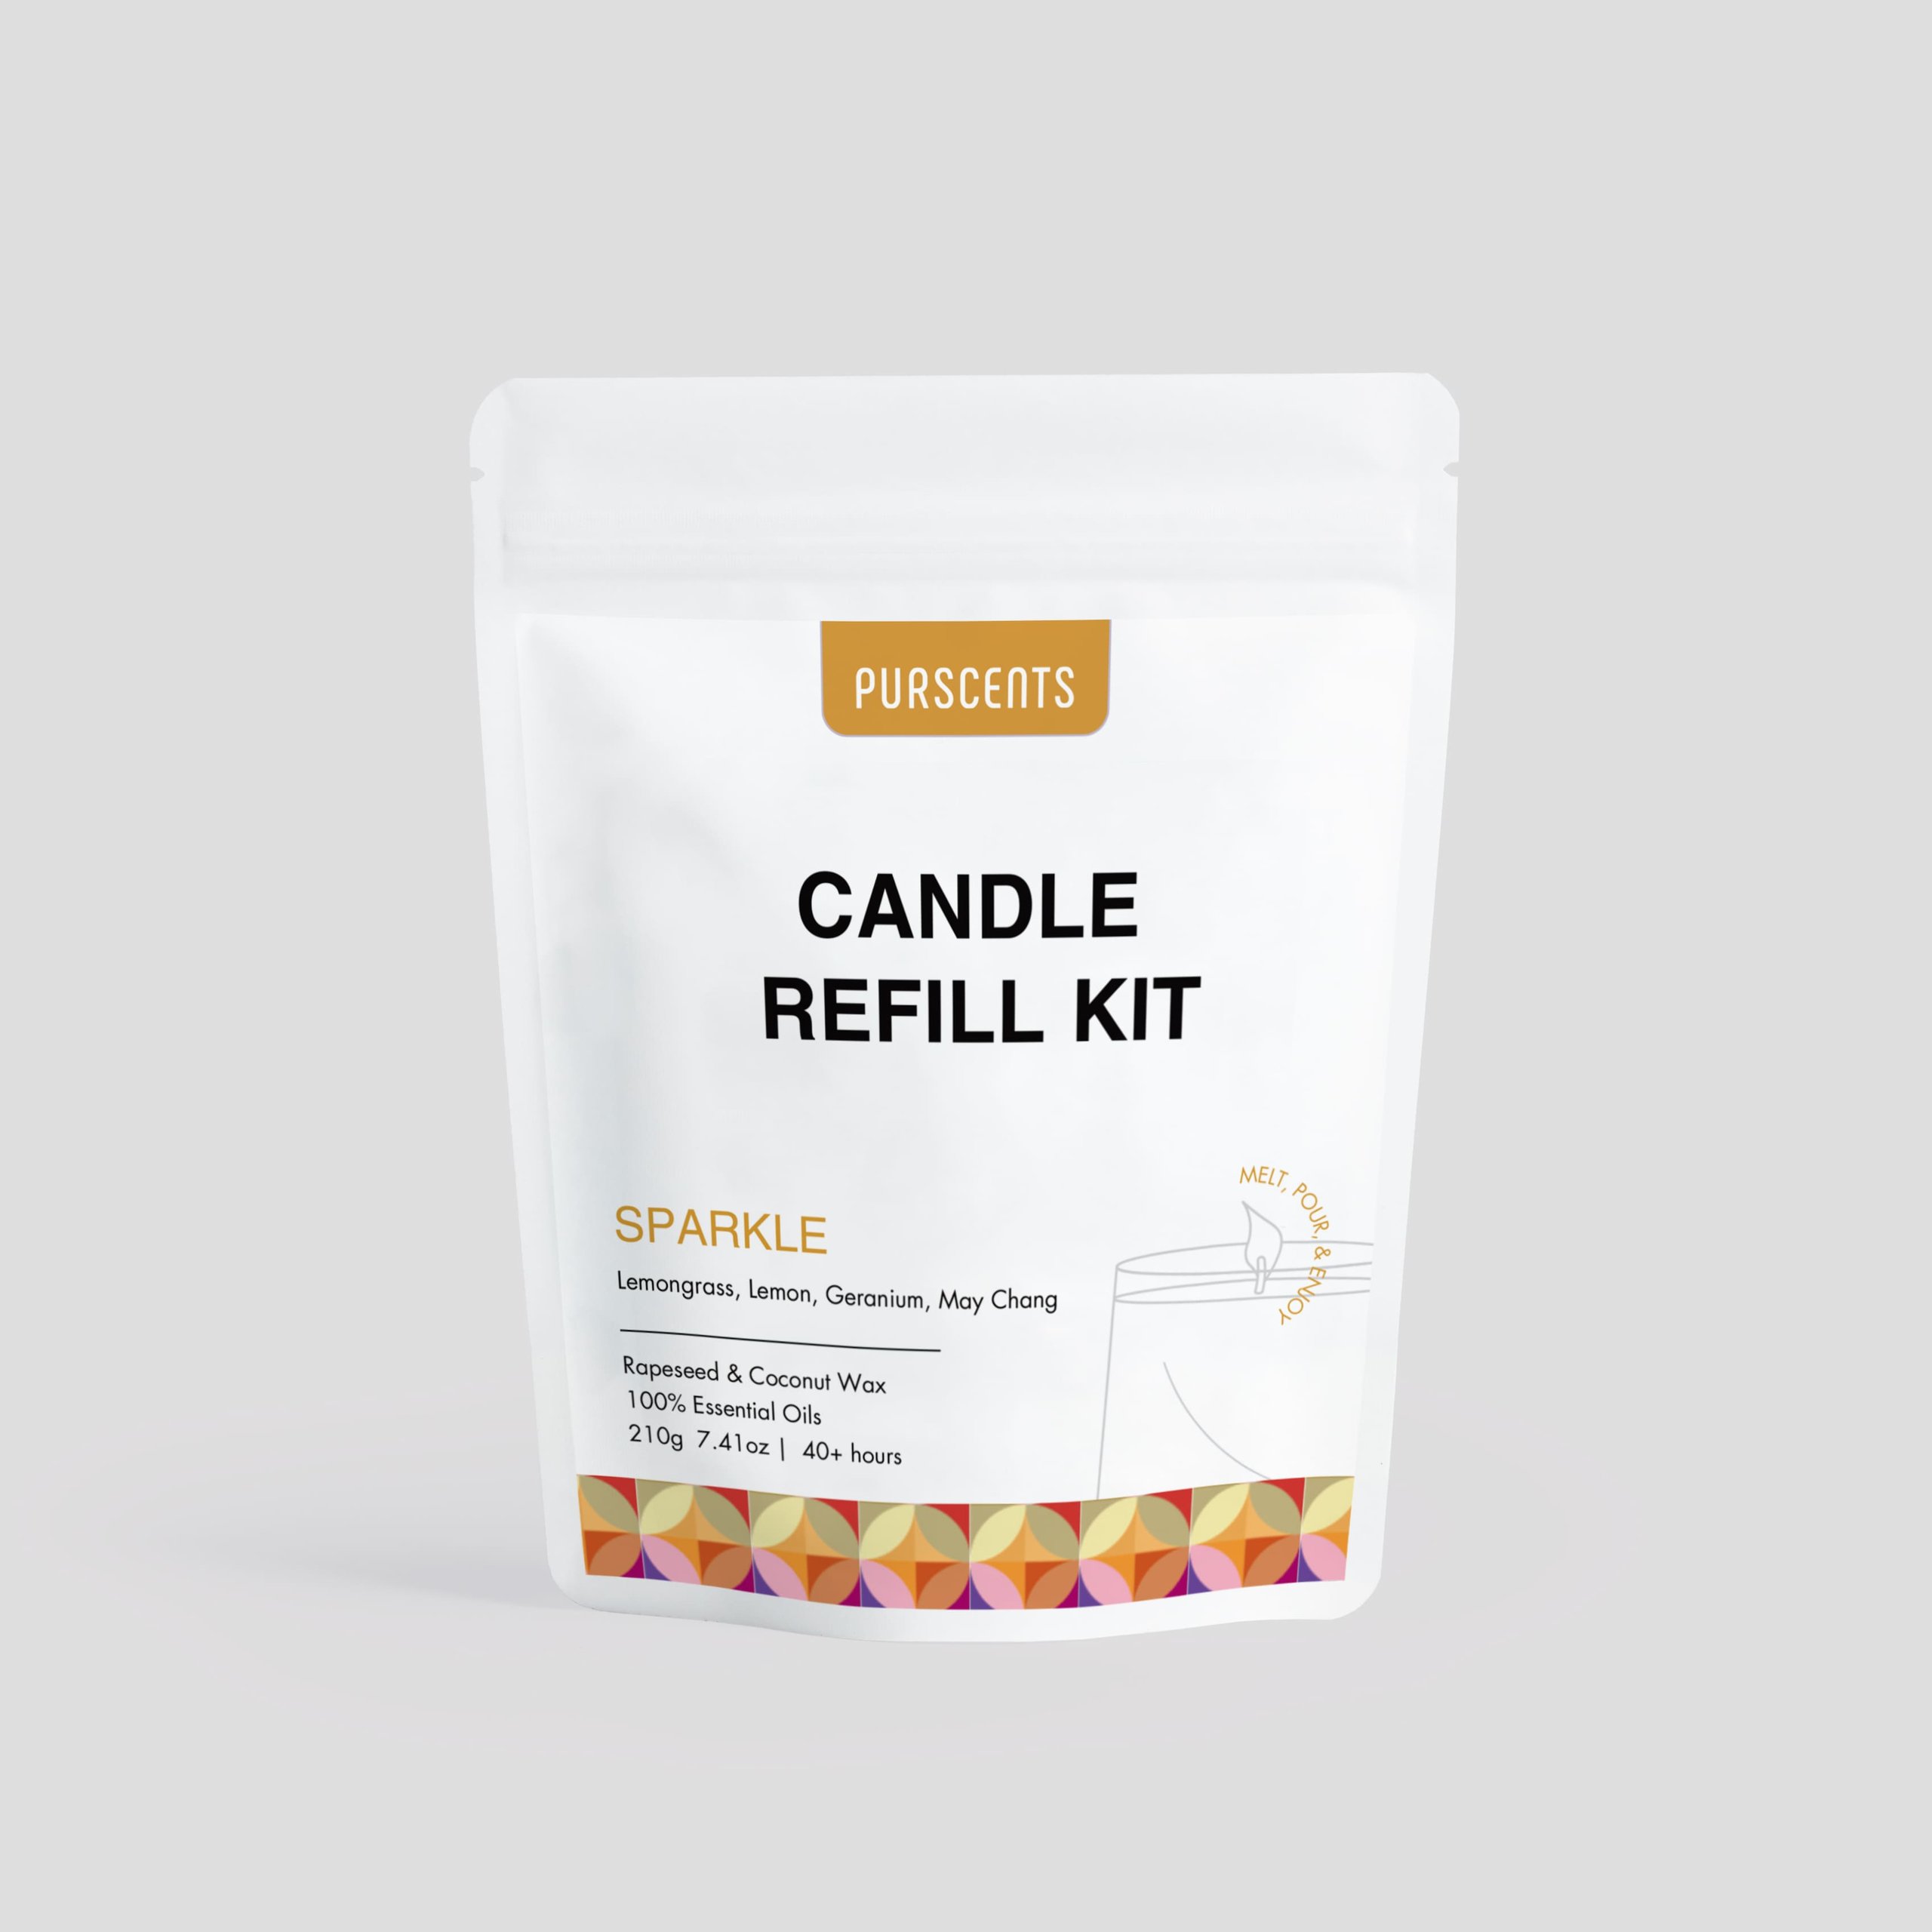 Sparkle Candle Refill Kut